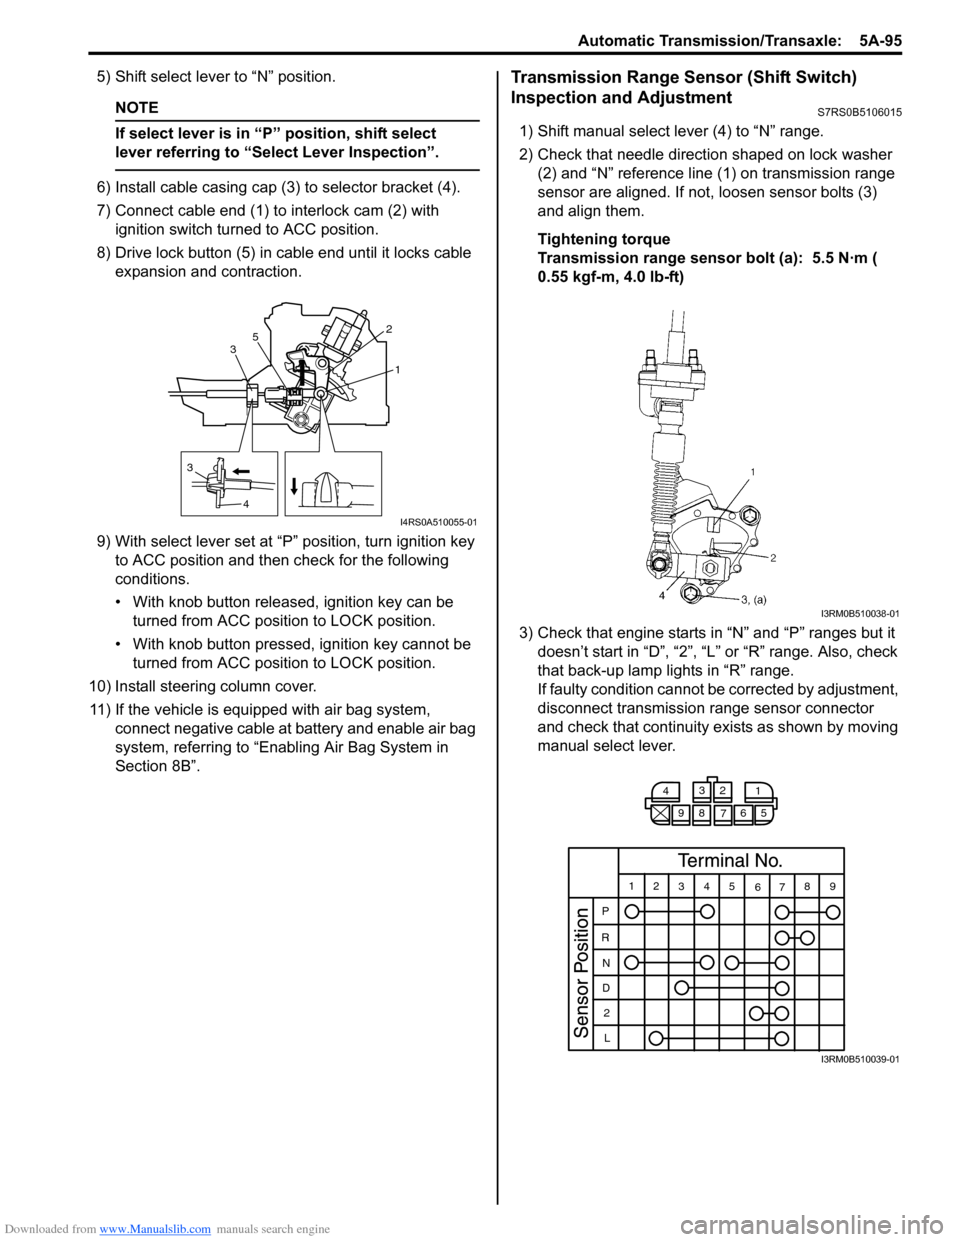 SUZUKI SWIFT 2008 2.G Service Workshop Manual Downloaded from www.Manualslib.com manuals search engine Automatic Transmission/Transaxle:  5A-95
5) Shift select lever to “N” position.
NOTE
If select lever is in “P” position, shift select 
